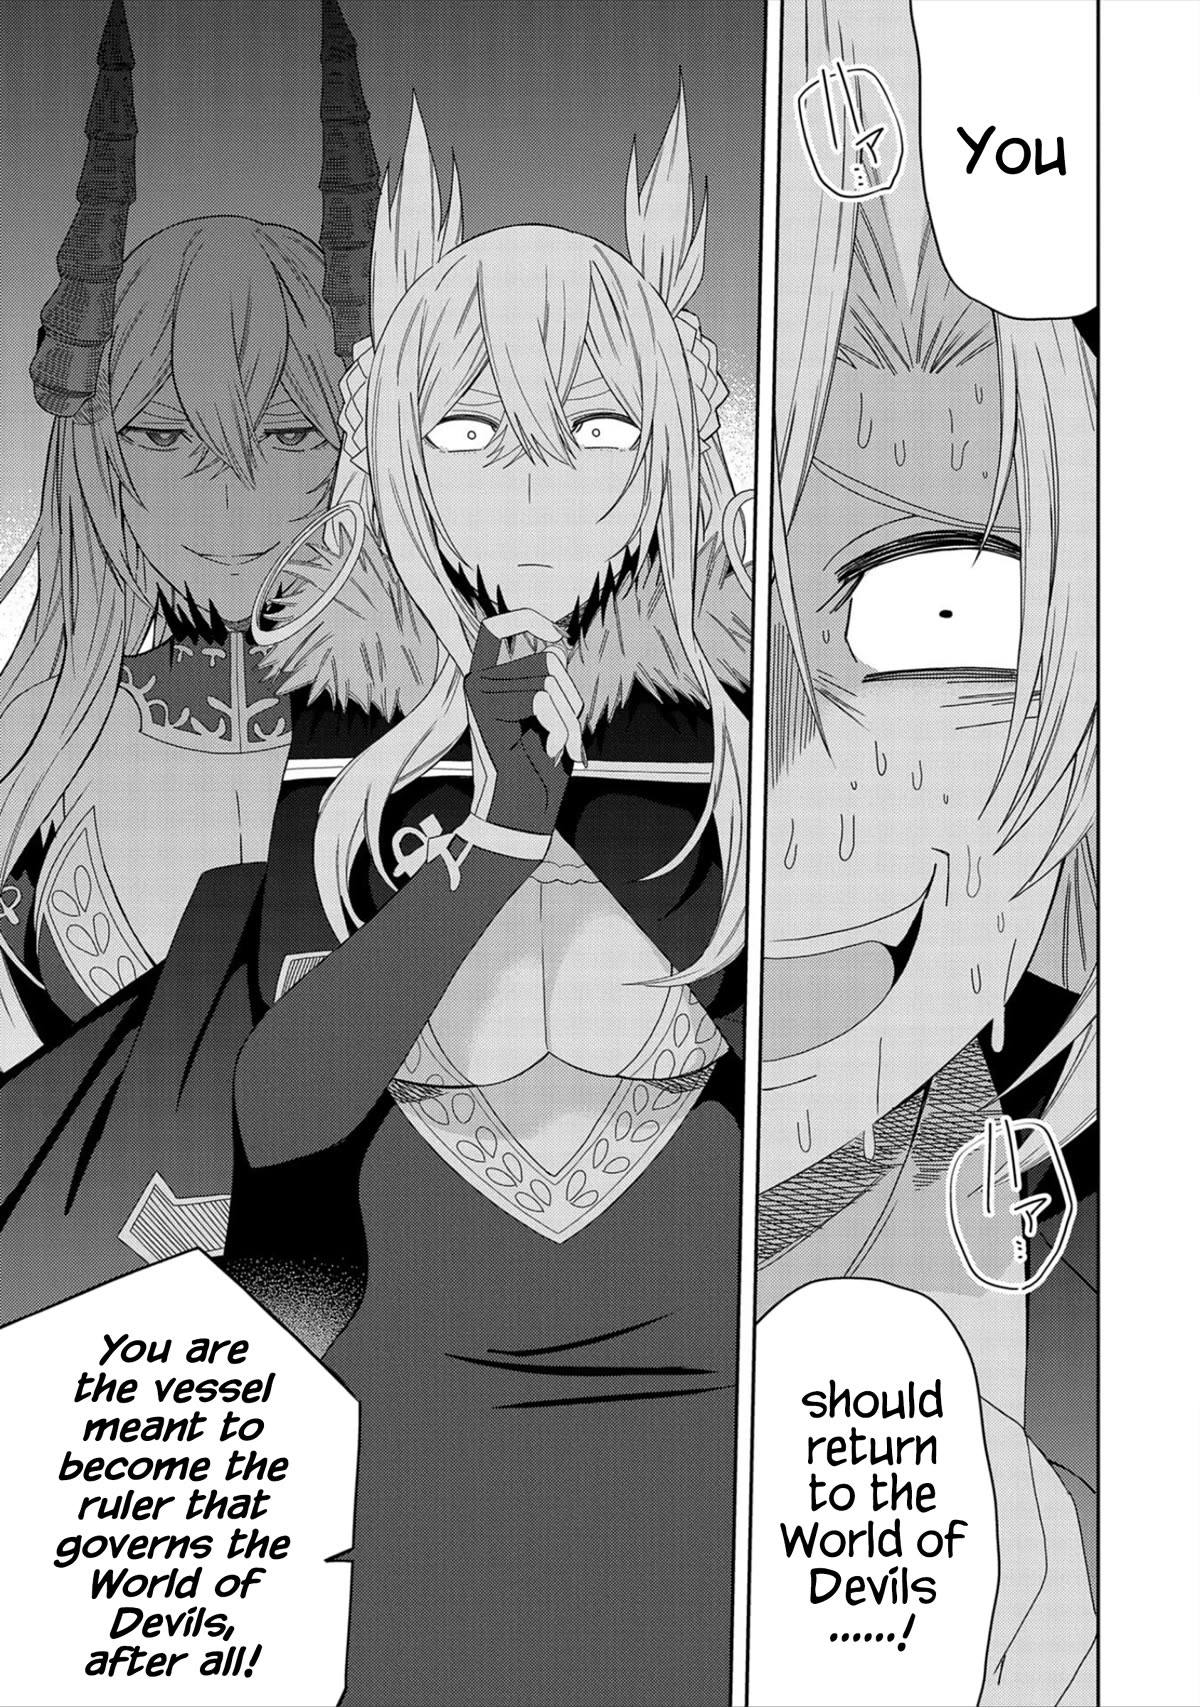 I Summoned The Devil To Grant Me A Wish, But I Married Her Instead Since She Was Adorable ~My New Devil Wife~ - chapter 29 - #1